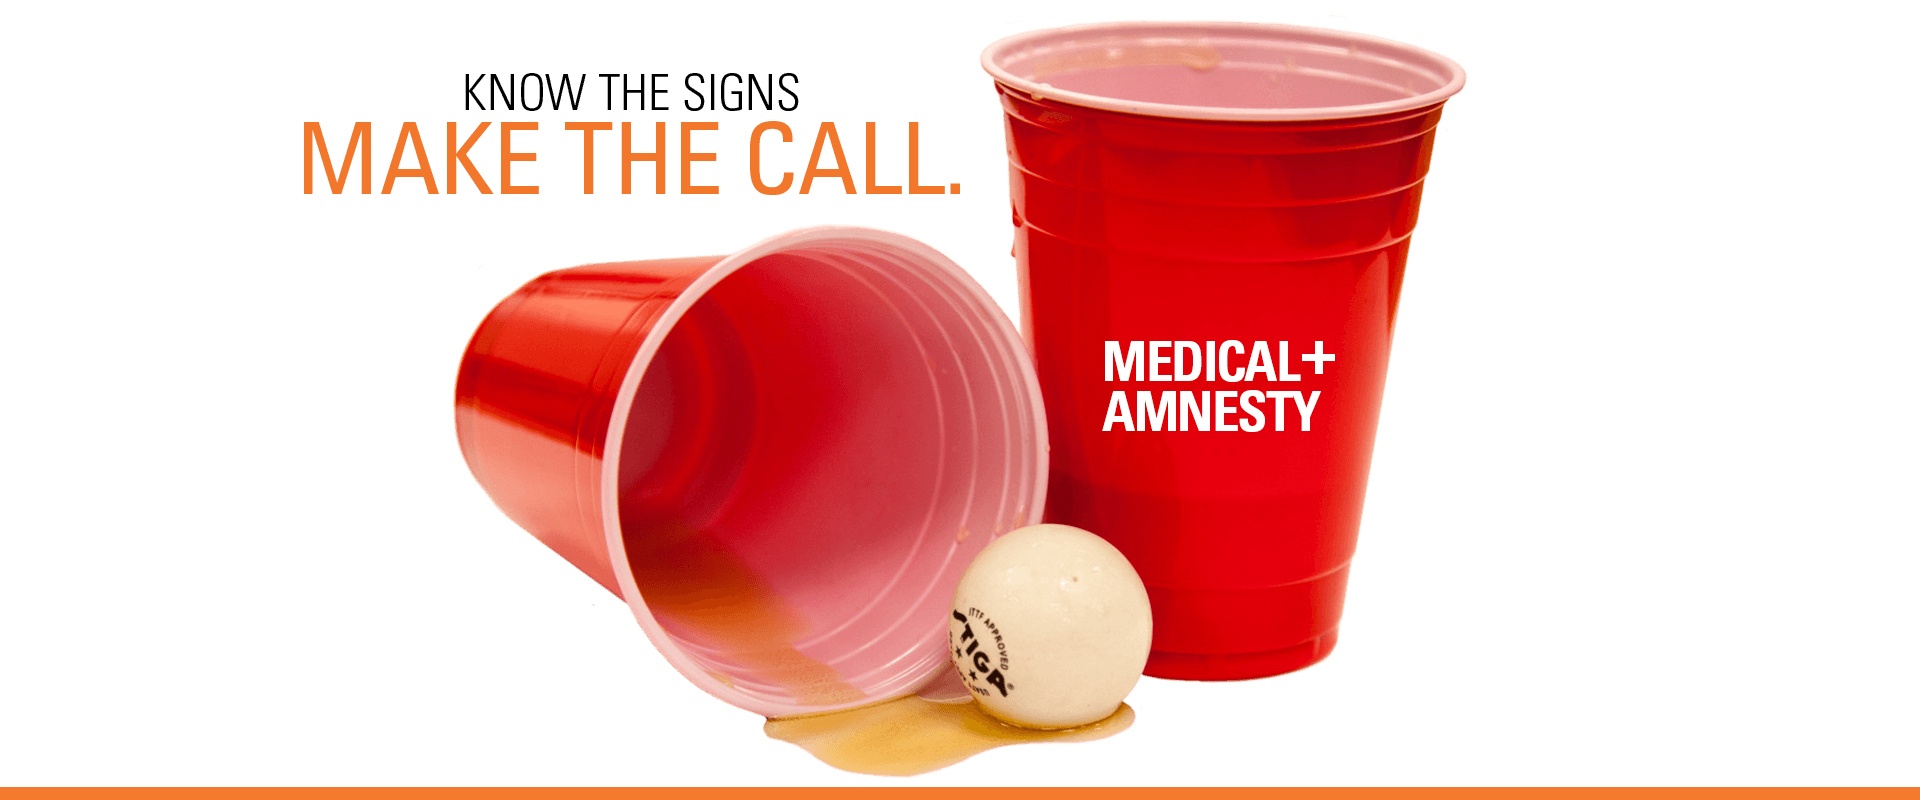 Know the Signs, make the call, Medical Amnesty +